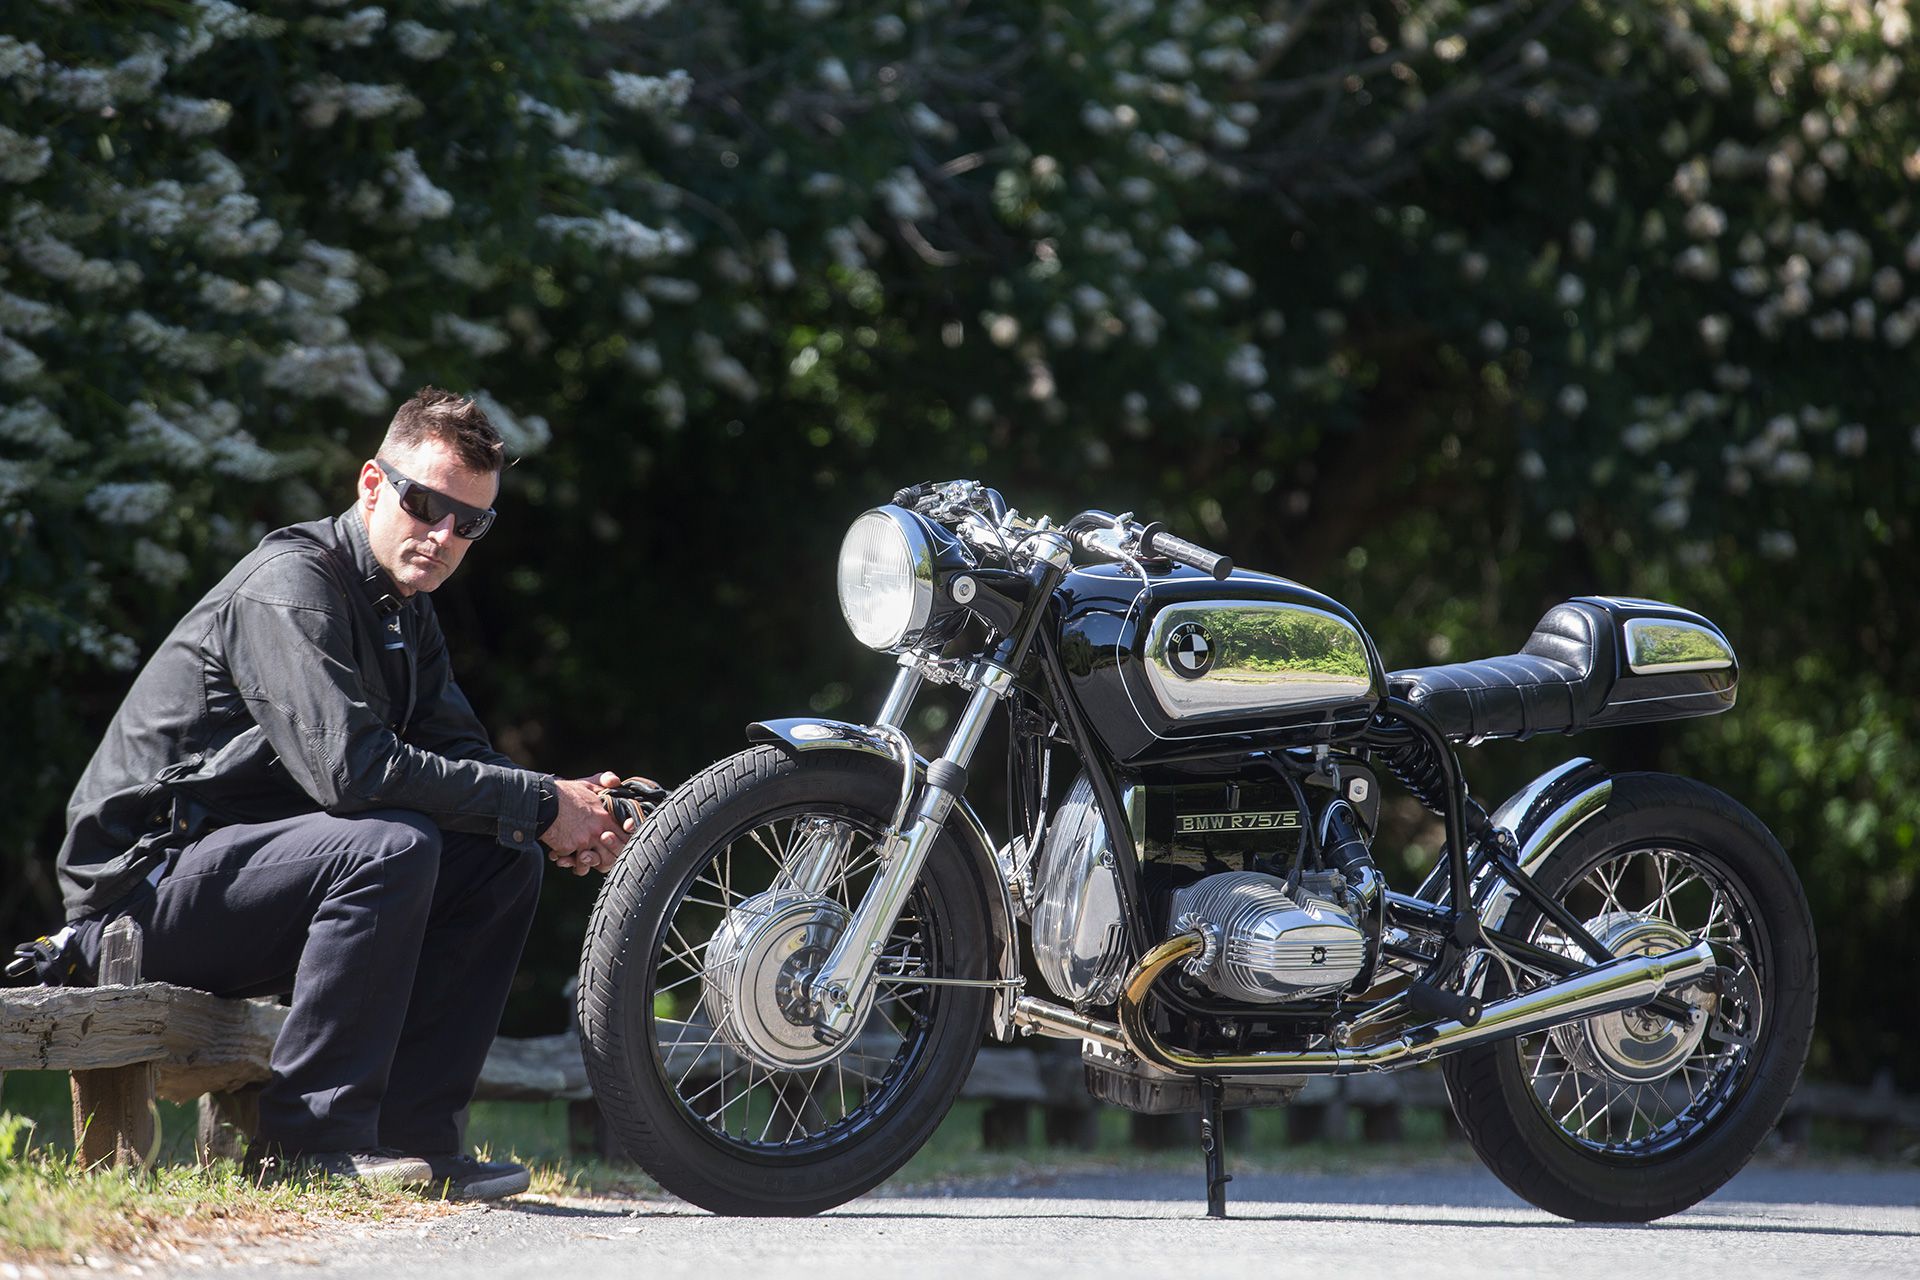 Bmw R75 5 Cafe Racer By Bryan Fuller Cycle World